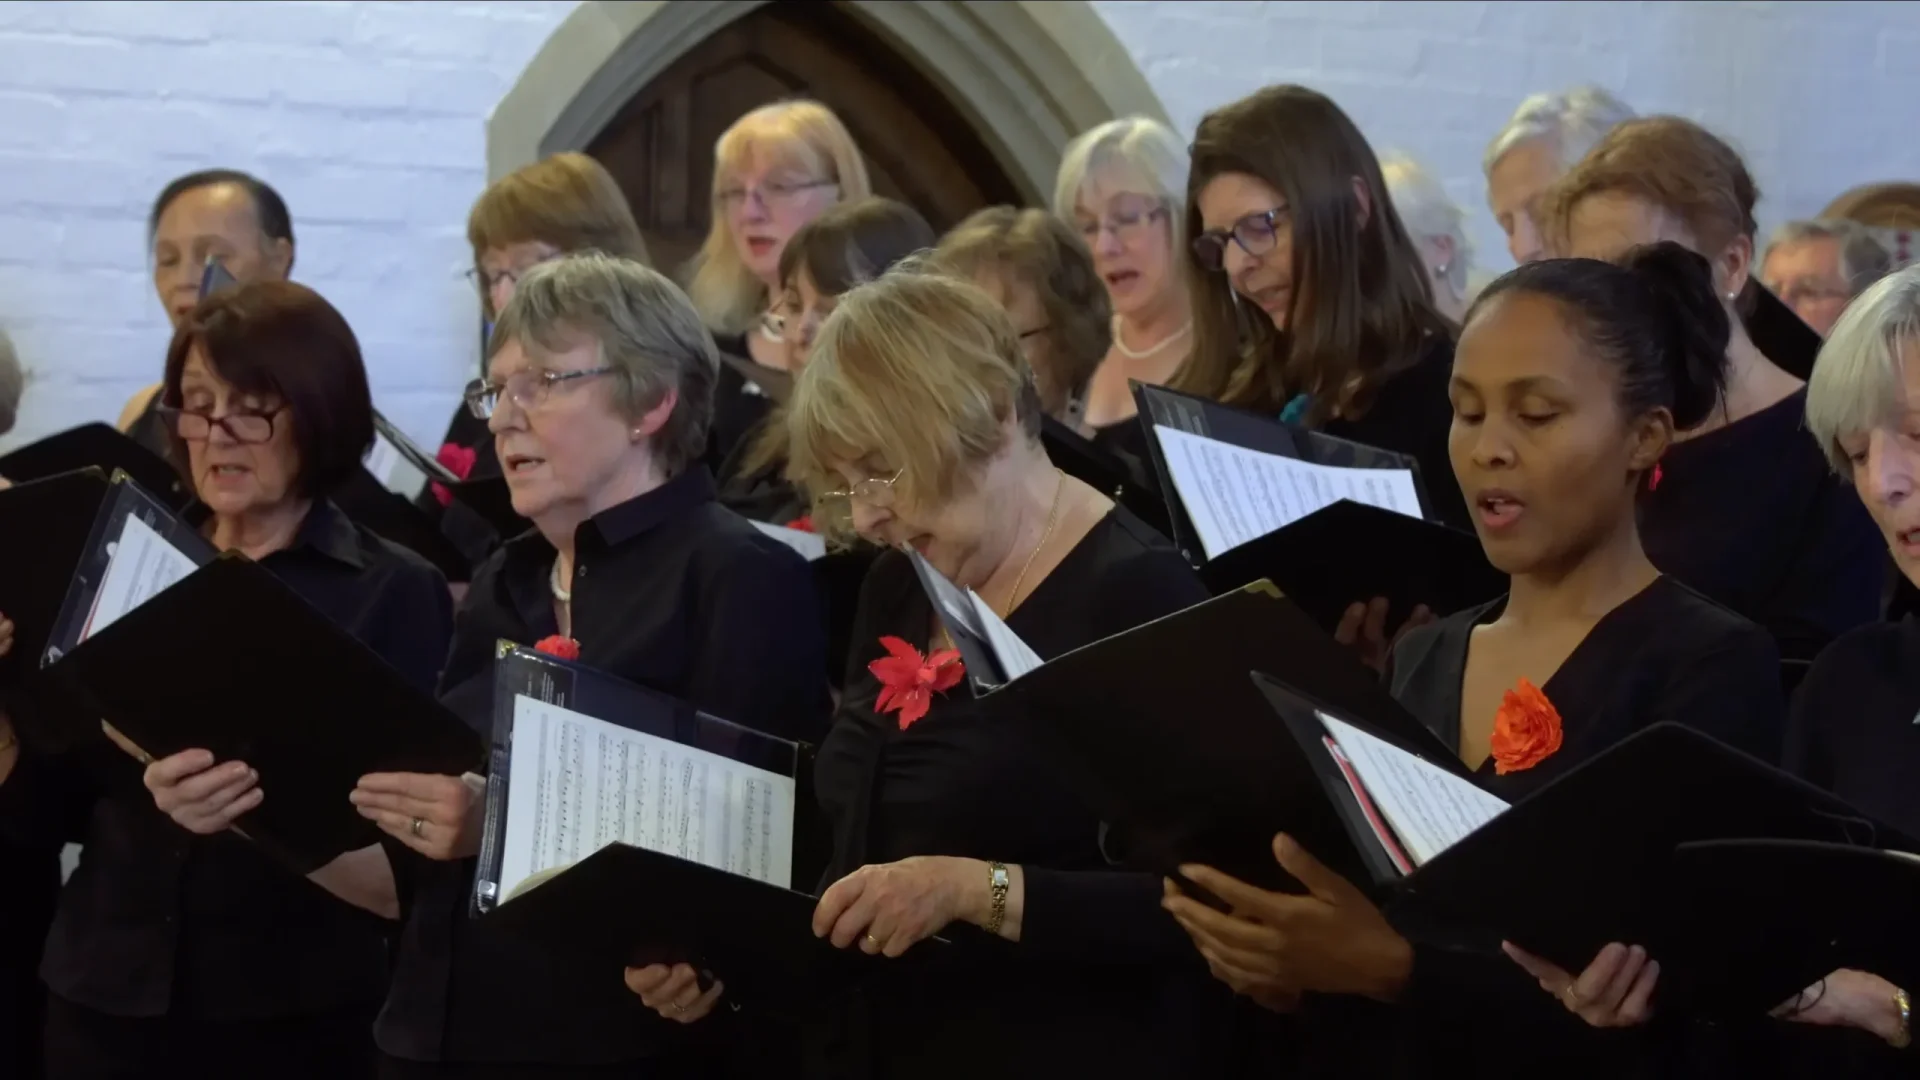 Close-up of choir singing in promotional video.